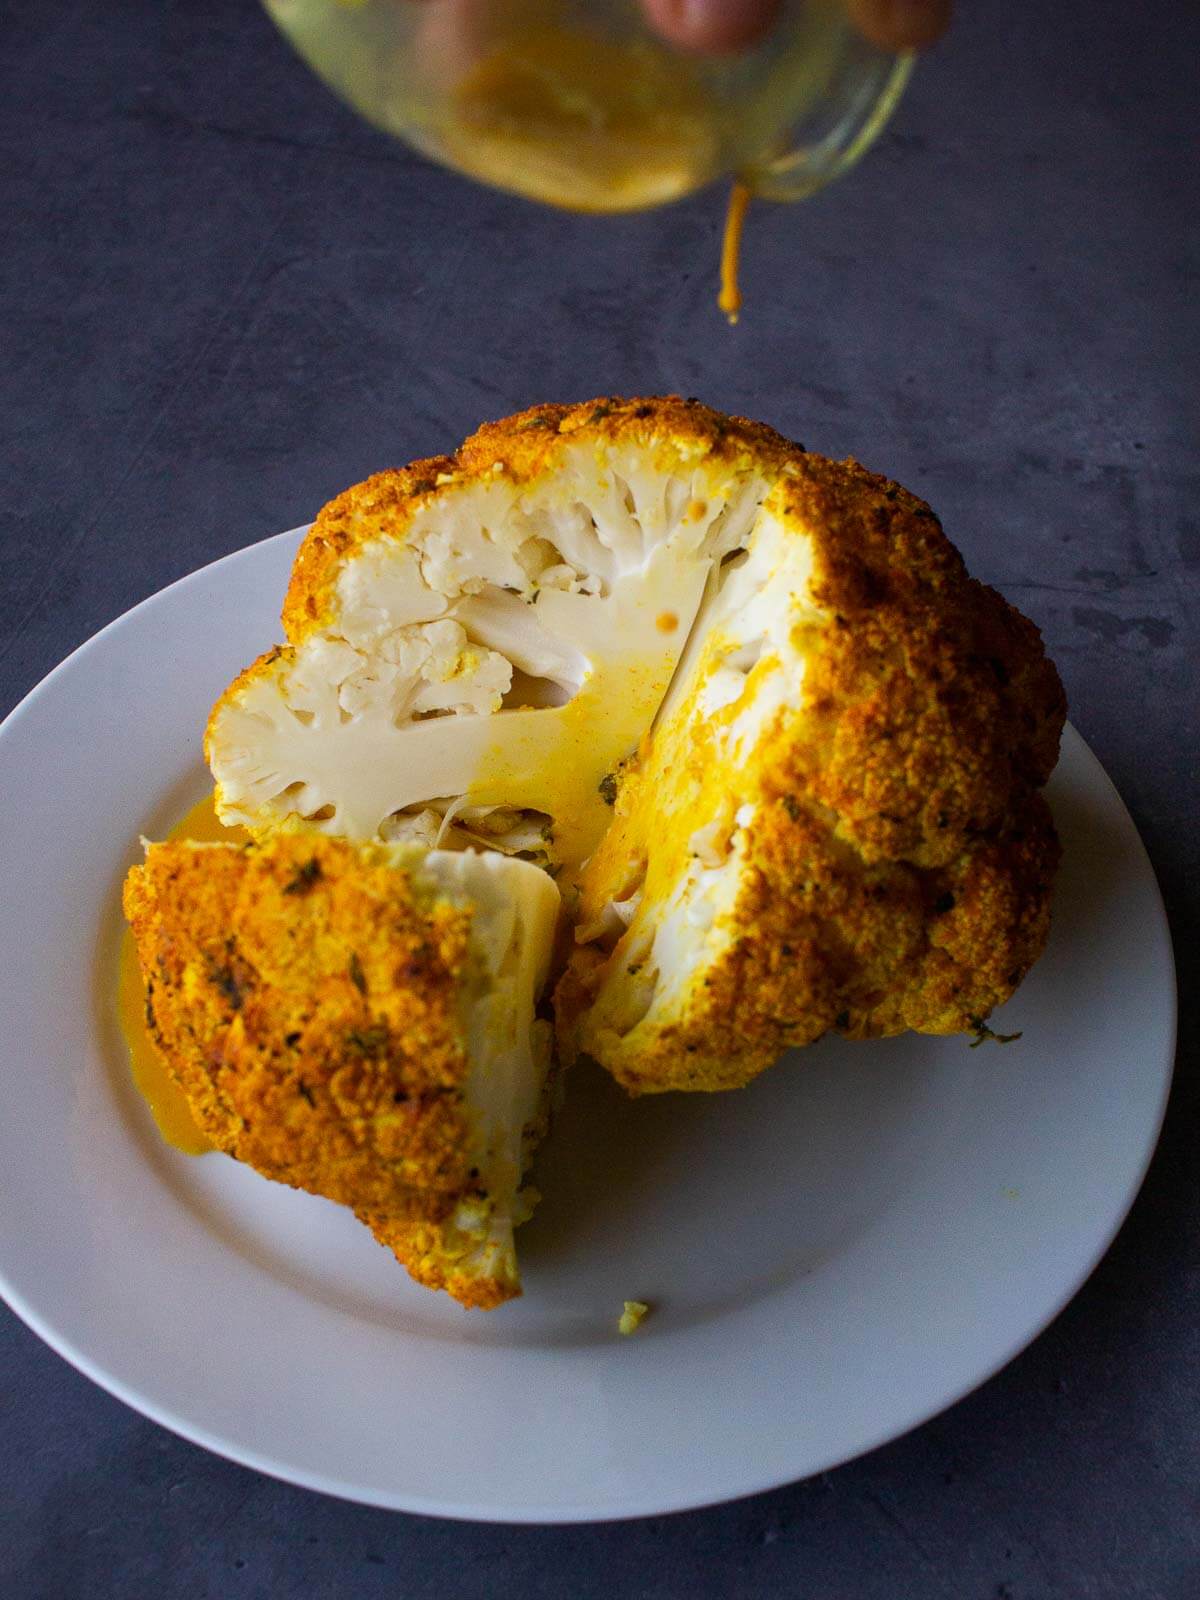 Spiced Roasted Cauliflower for a vegan spring meal